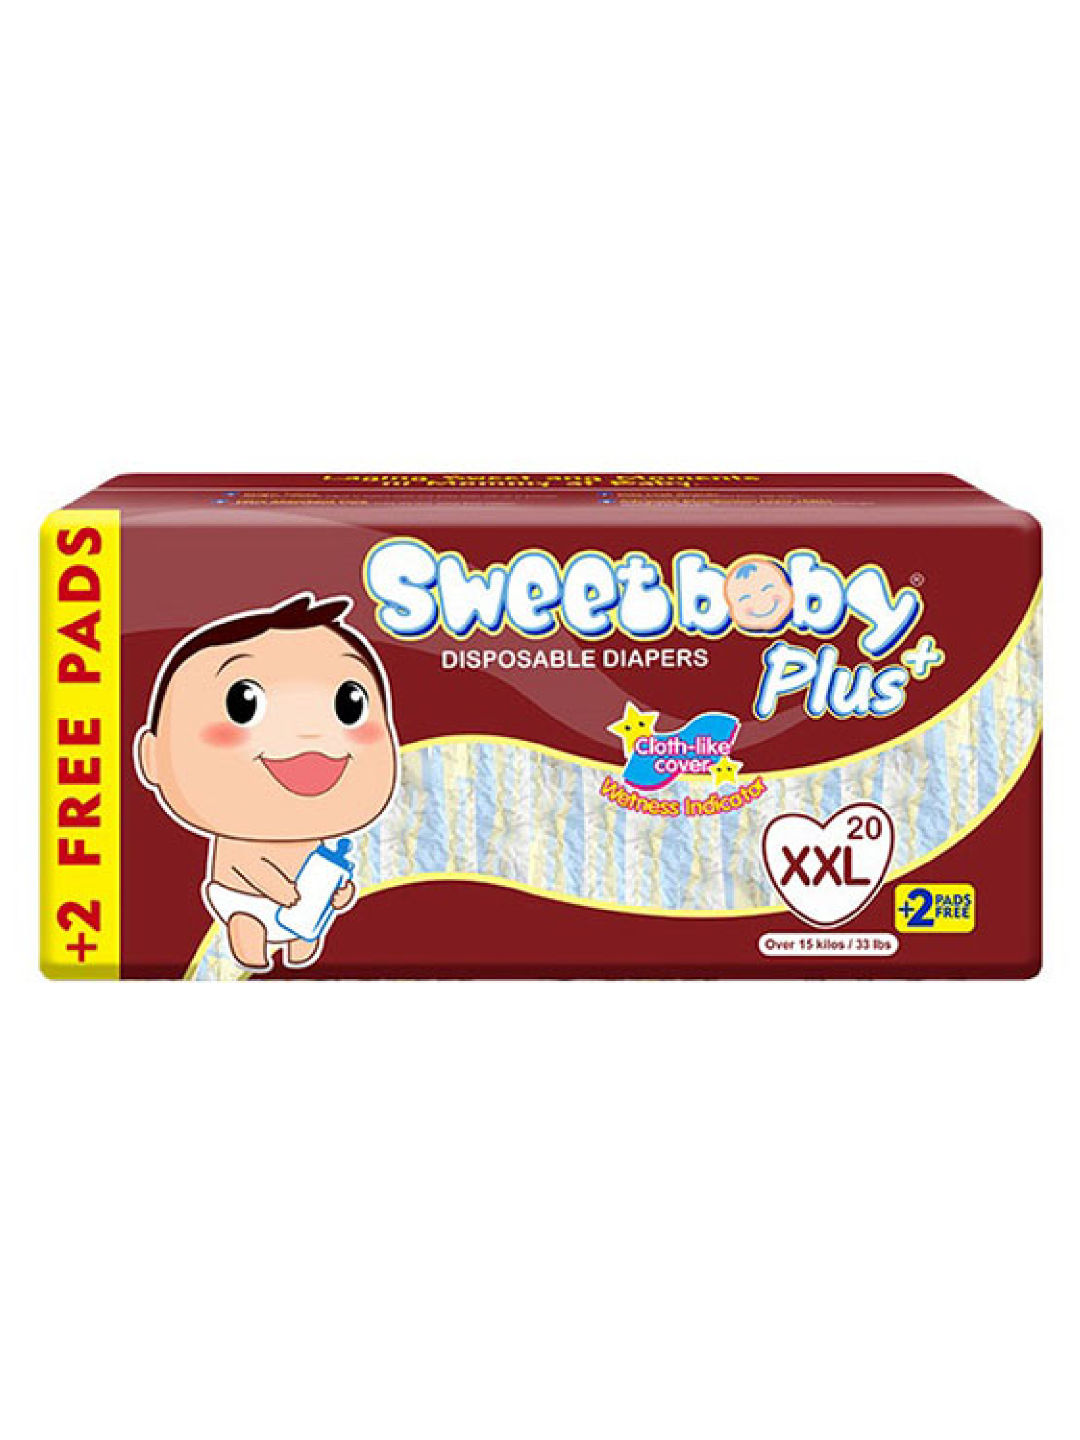 Sweetbaby Plus Disposable Diapers XXL Big Pack (20s)